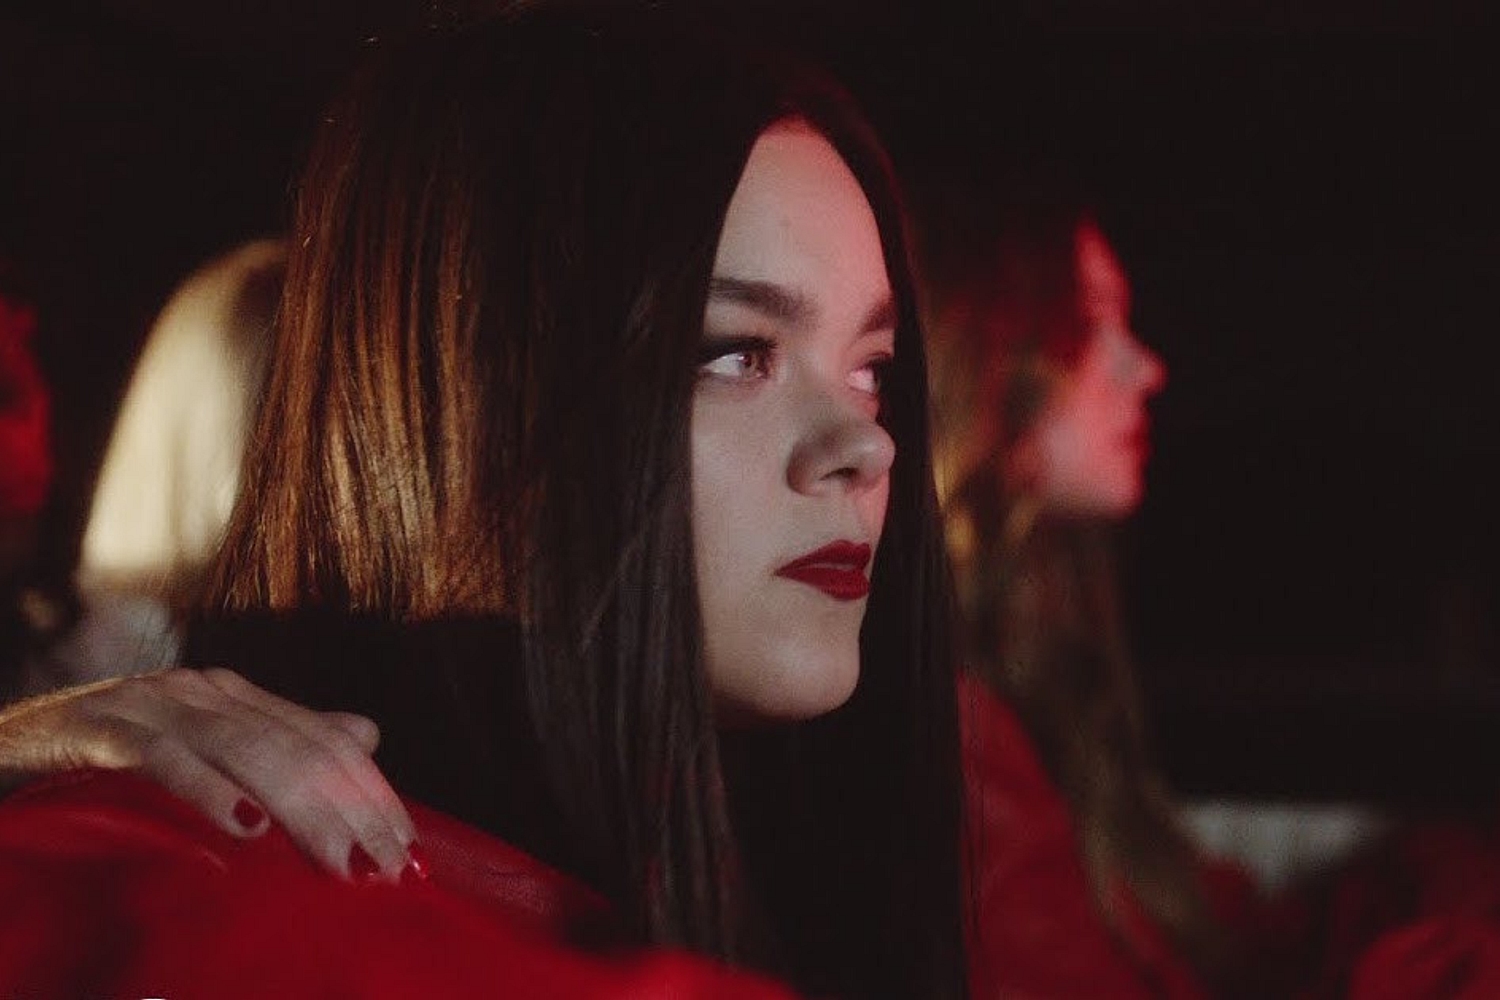 First Aid Kit announce ‘Tender Offerings’ EP and share ‘Rebel Heart’ video